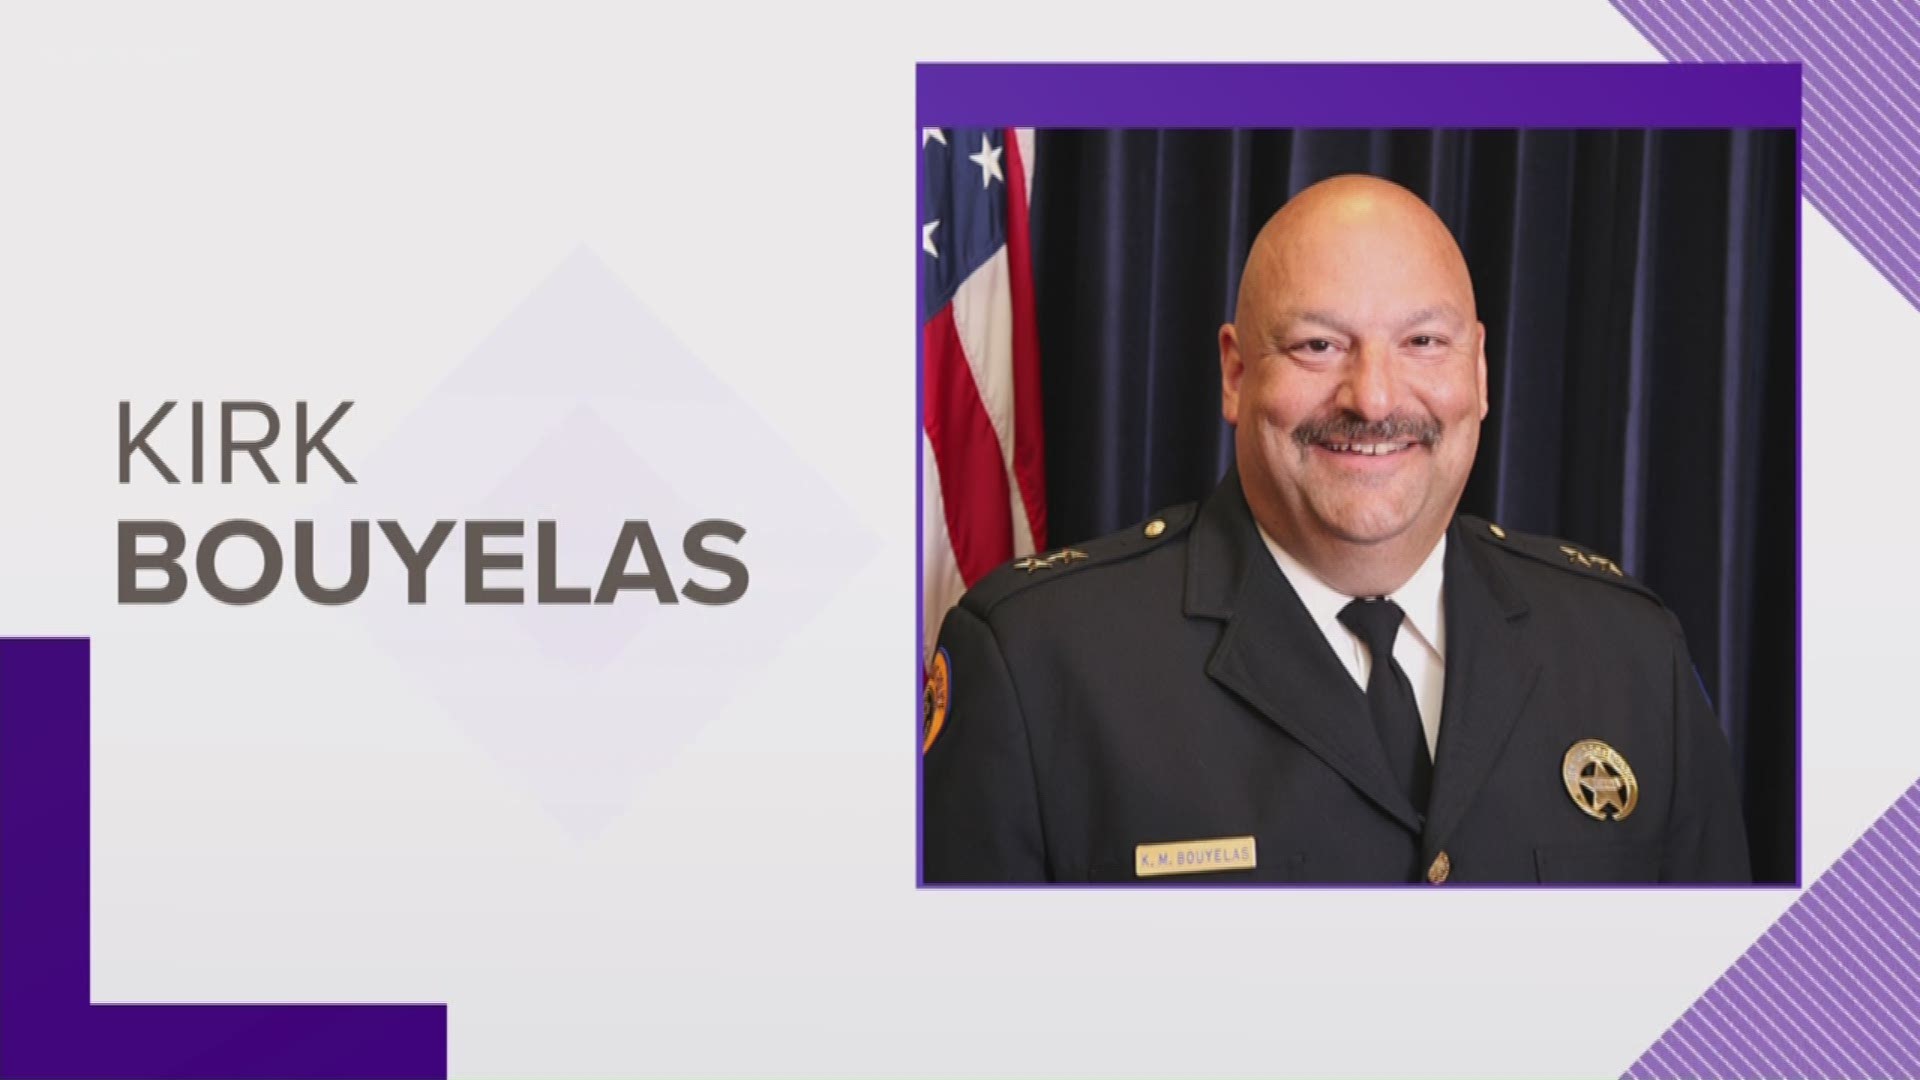 Tulane University named local law enforcement veteran Kirk Bouyelas as its new chief of police Thursday, exactly six months after a WWL-TV investigation of improper use of force and alleged cover-ups forced the resignation of the department's previous chi